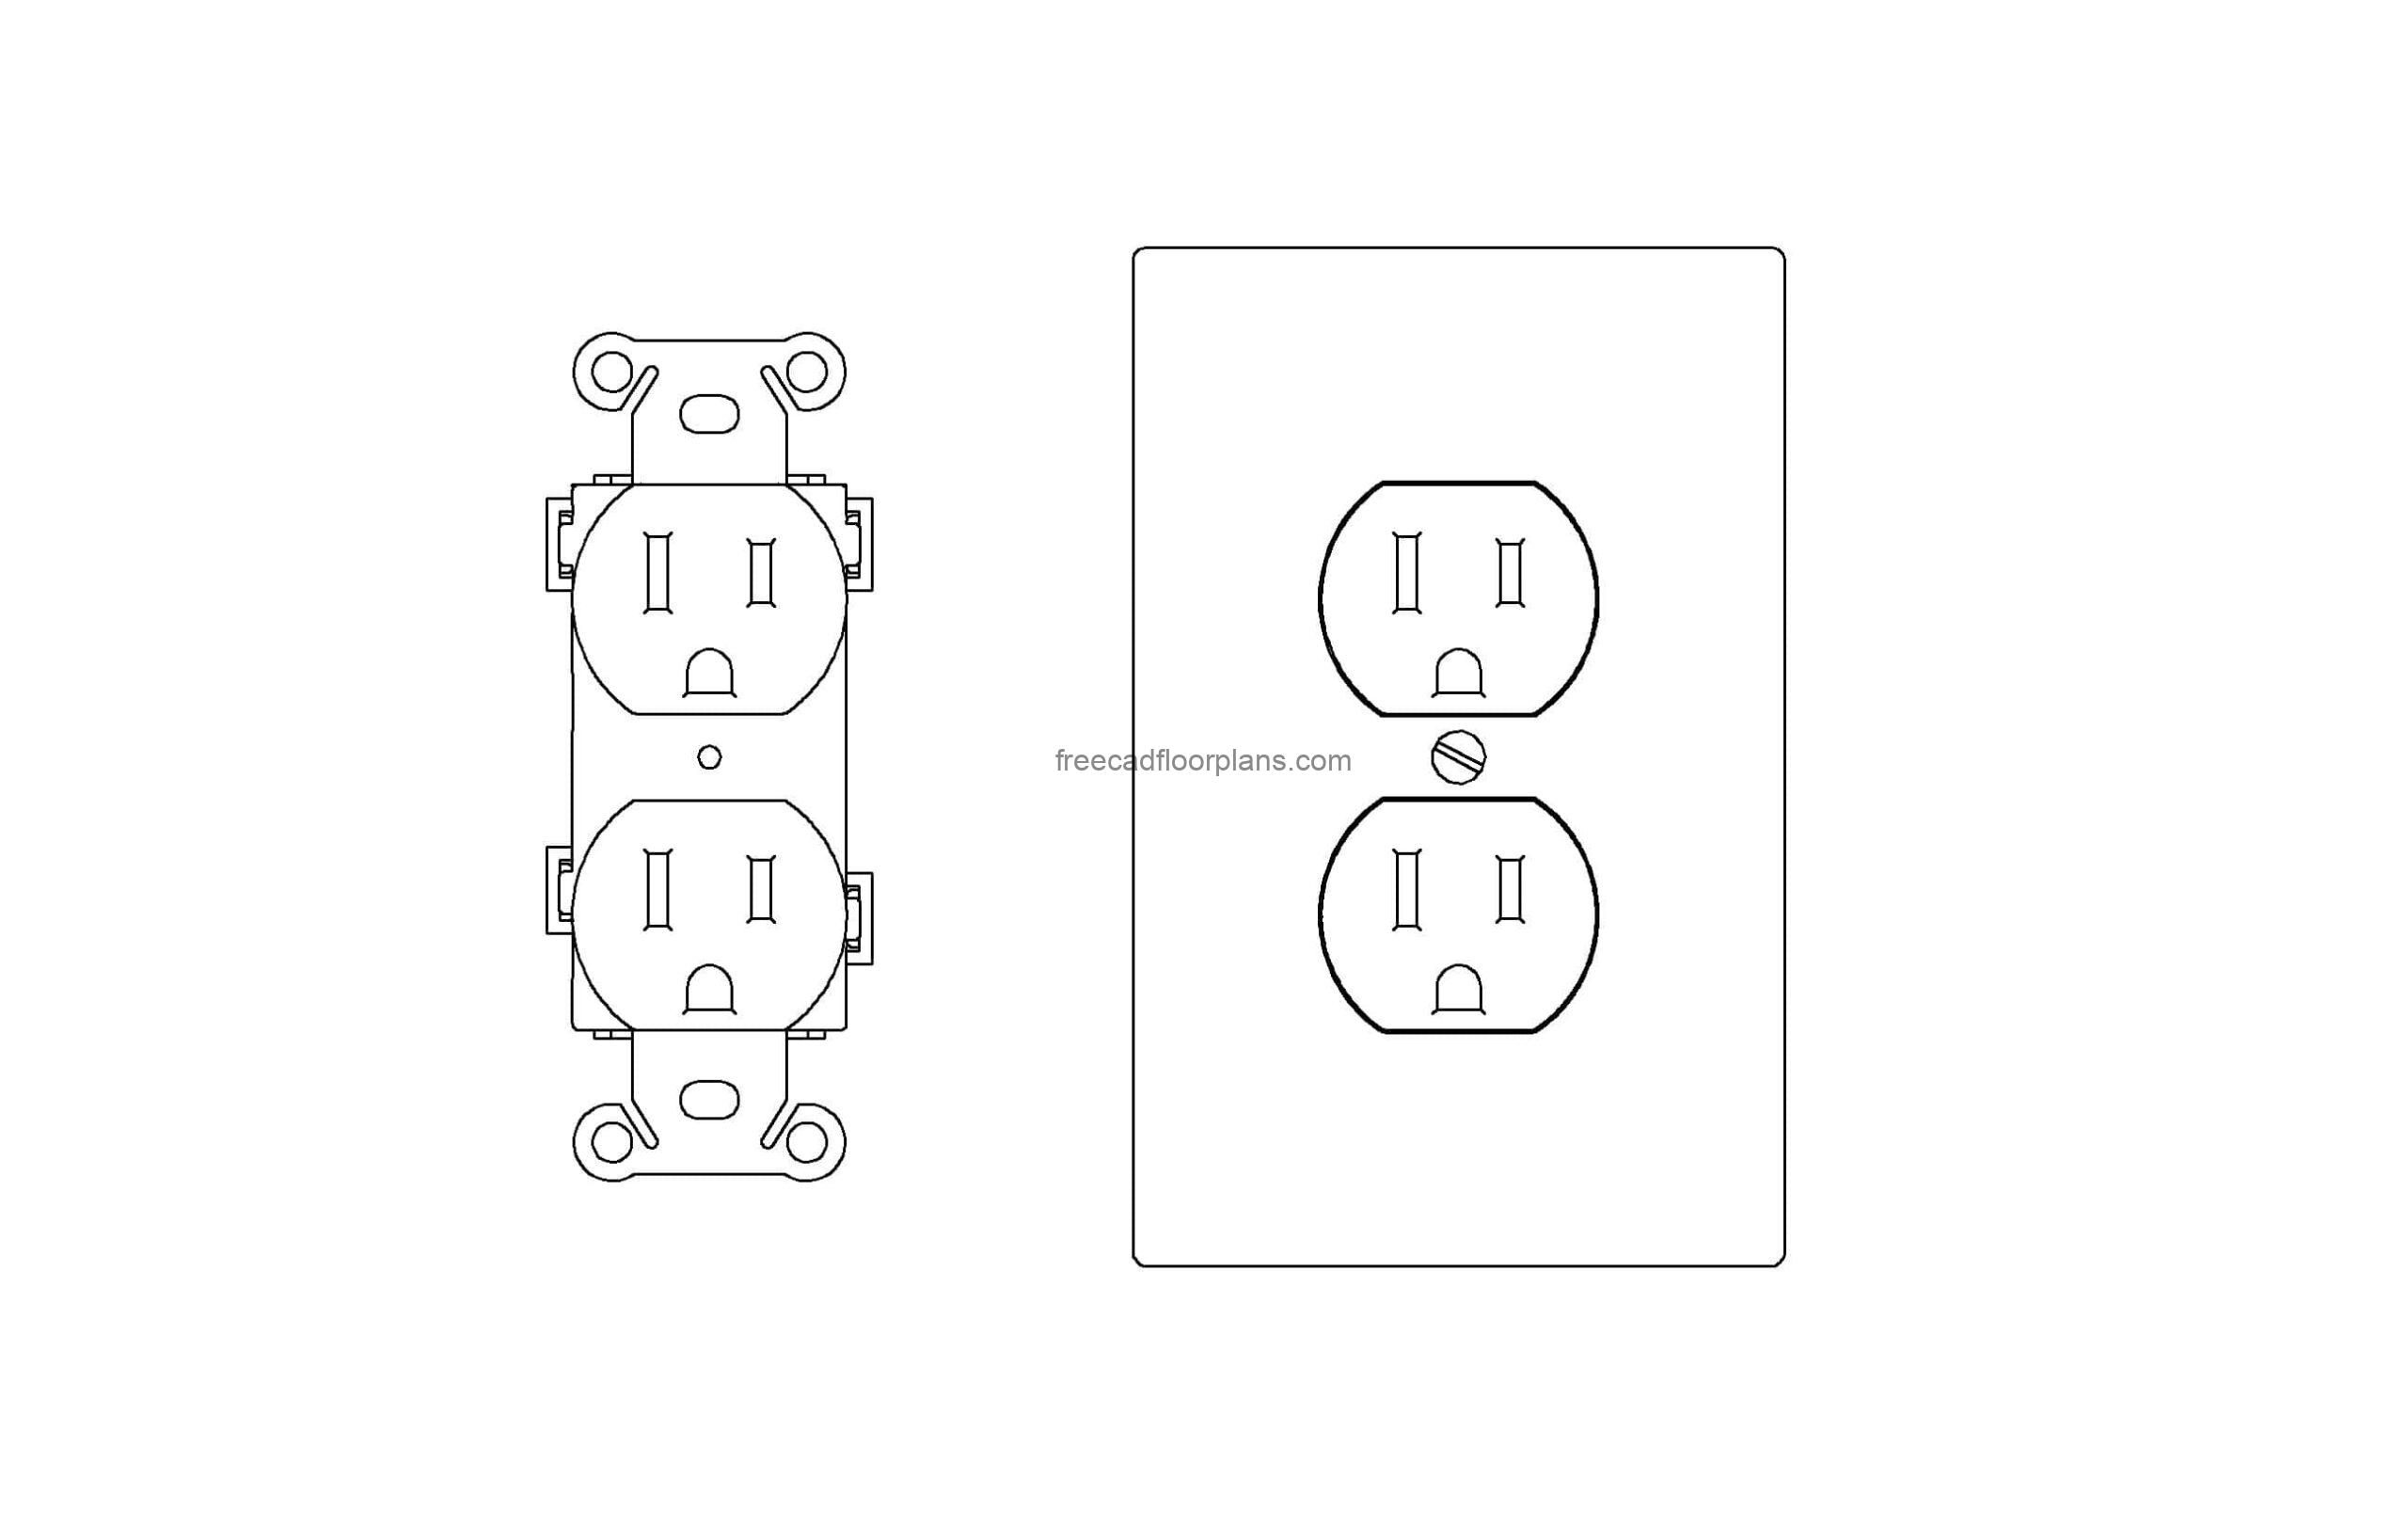 duplex outlet autocad 2d drawing, elevation front view, dwg file for free download